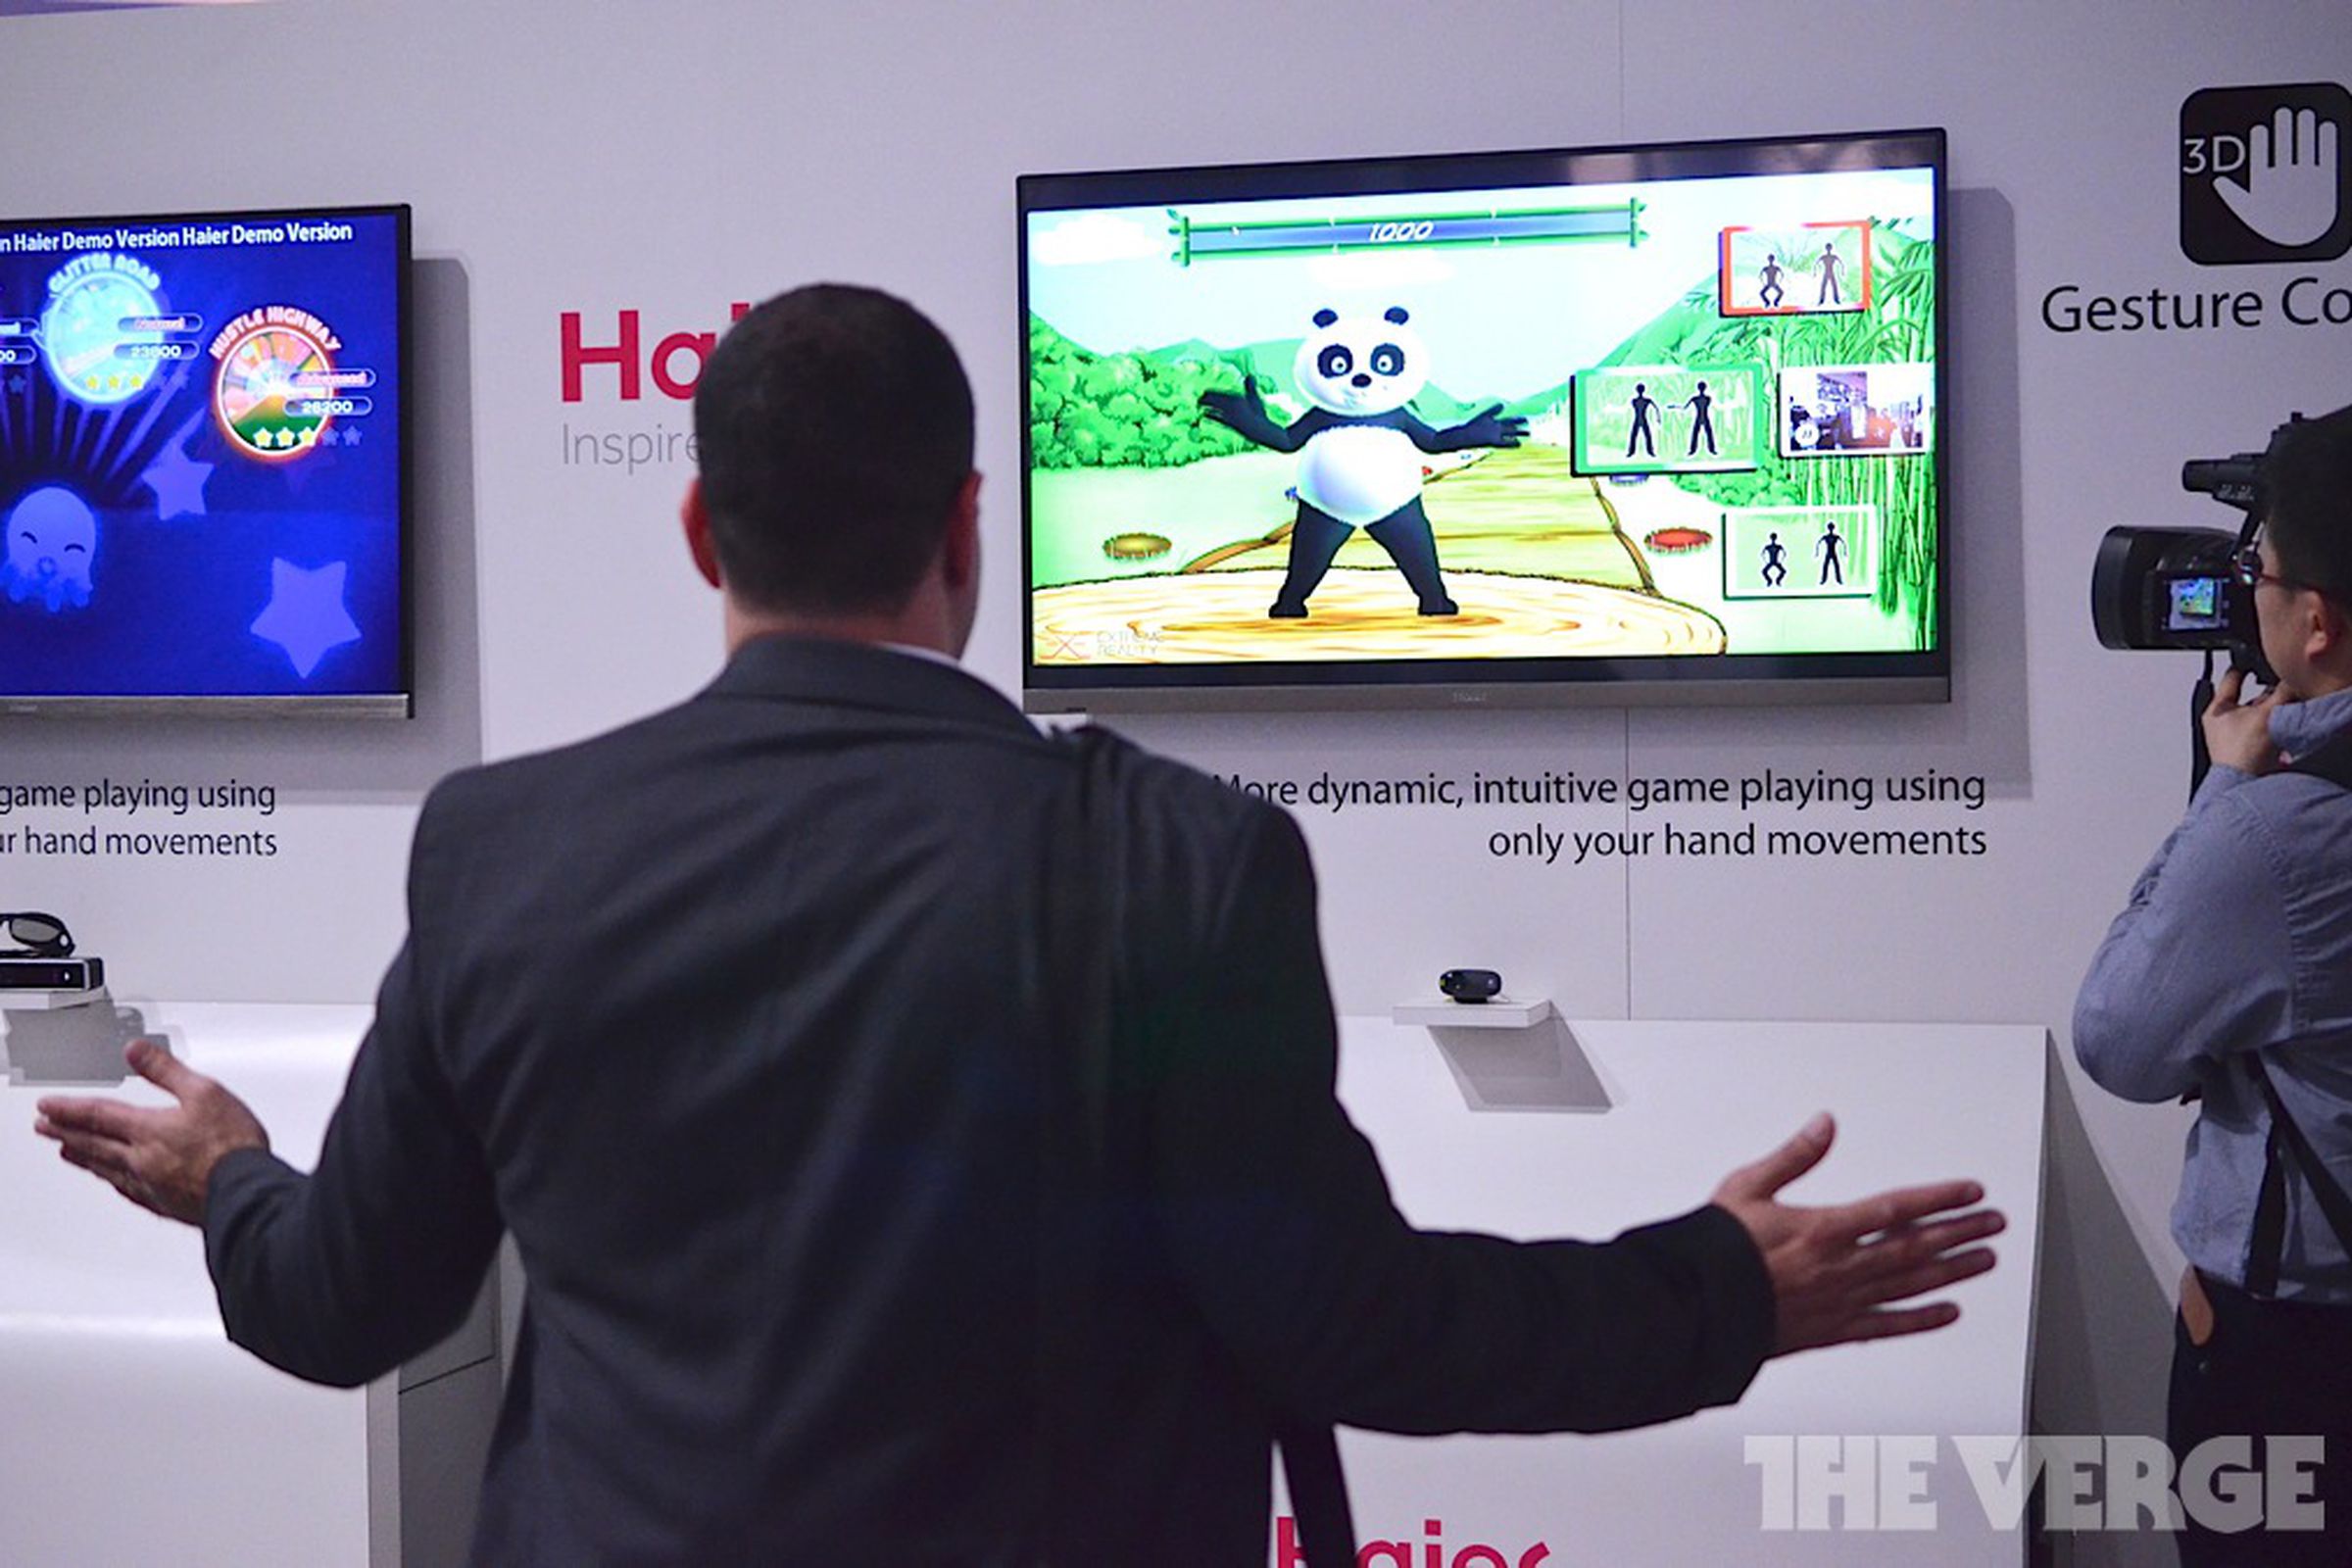 A CES-goer tries out Haier's gesture control TV